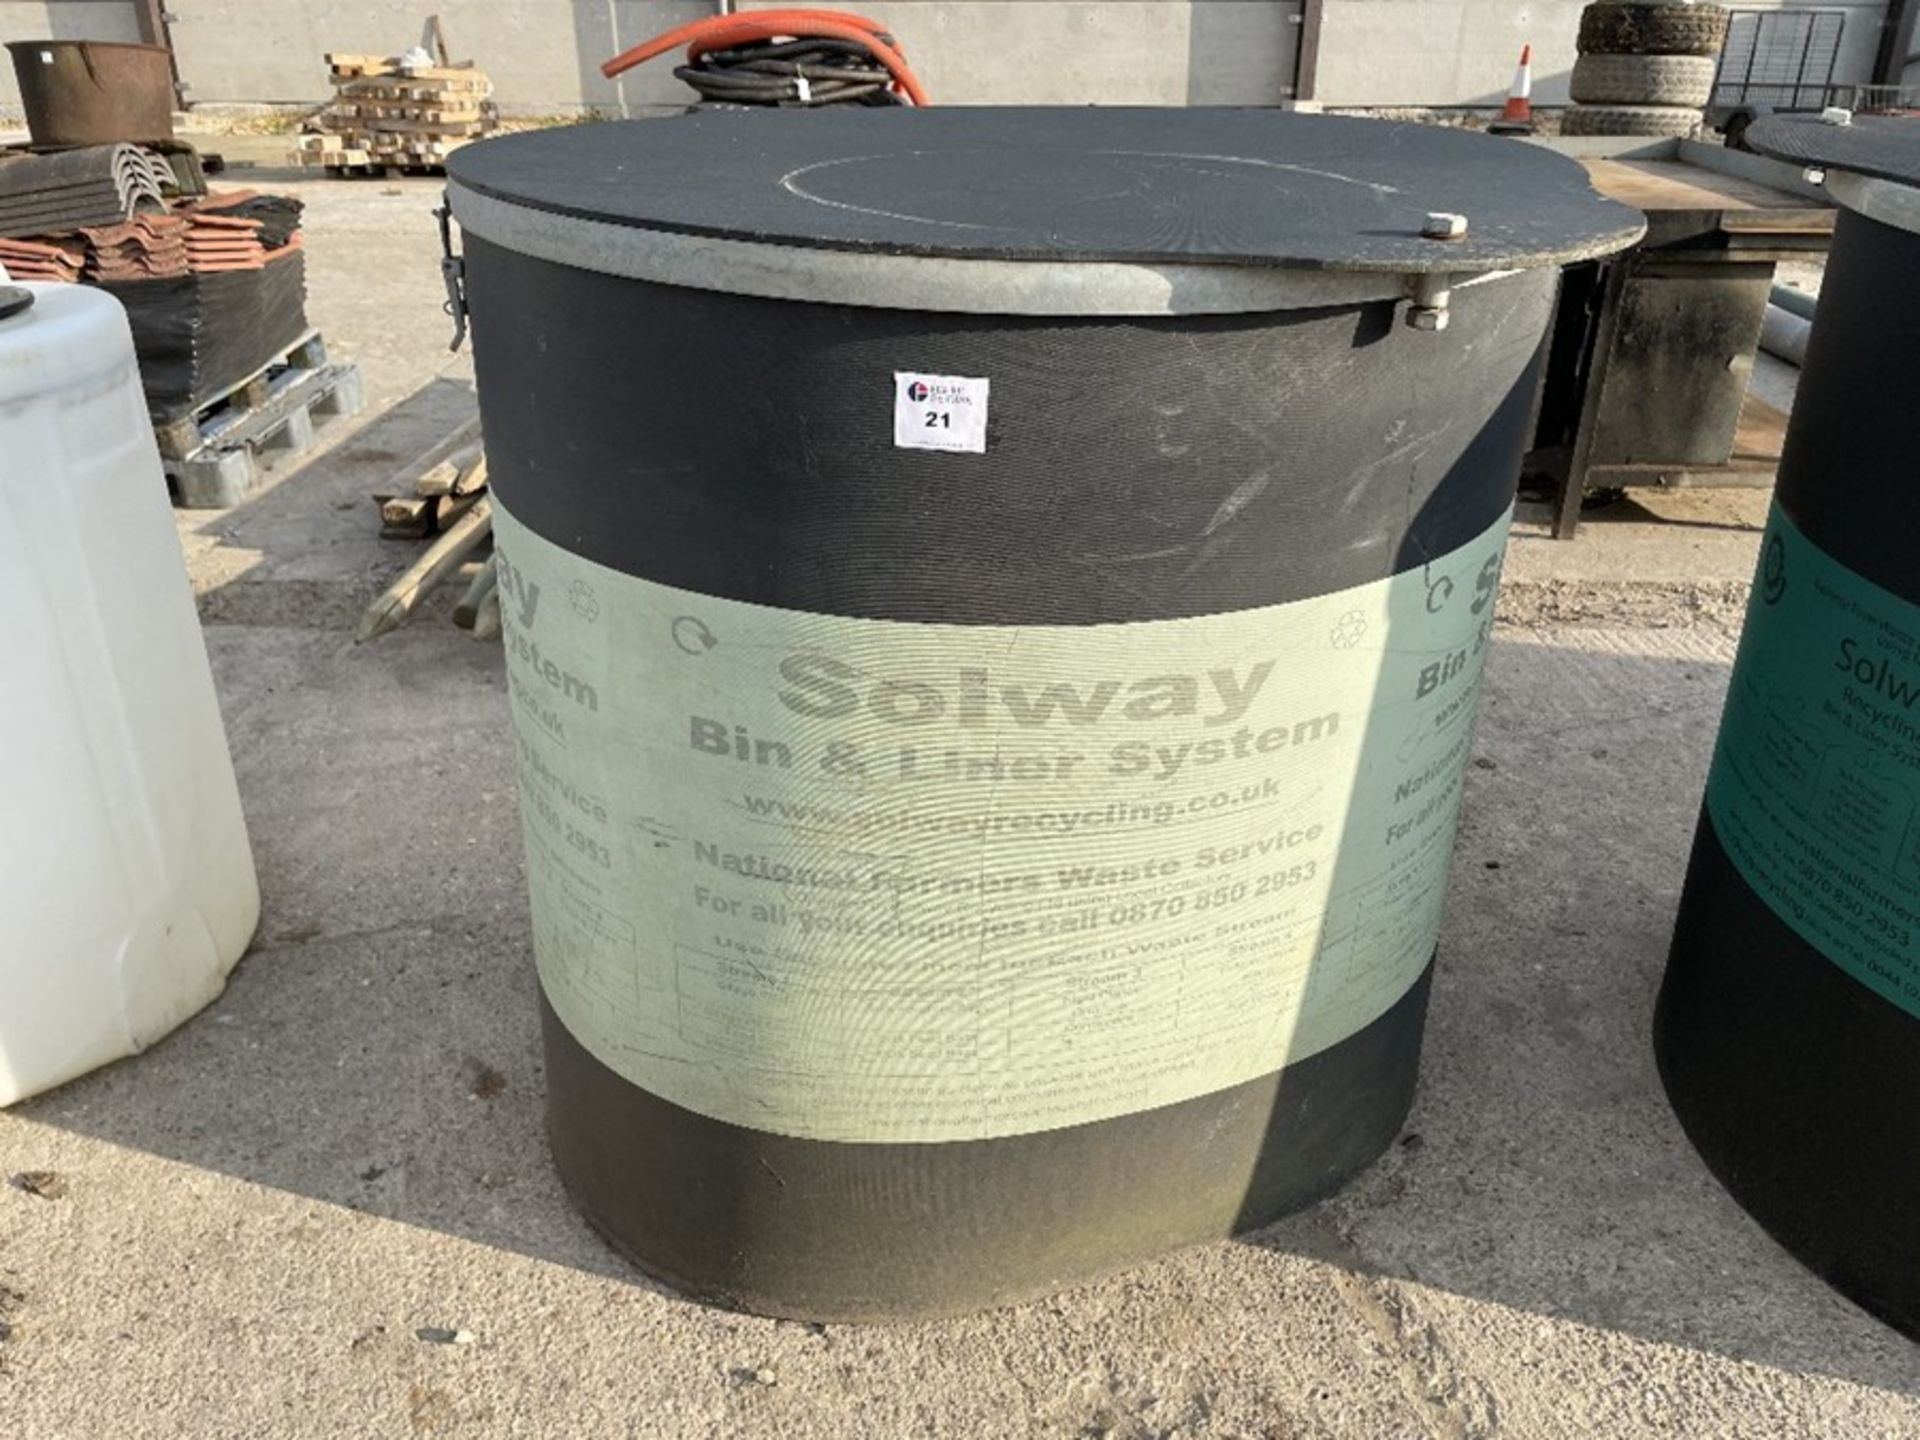 Solway Recycling Bin and Liner System